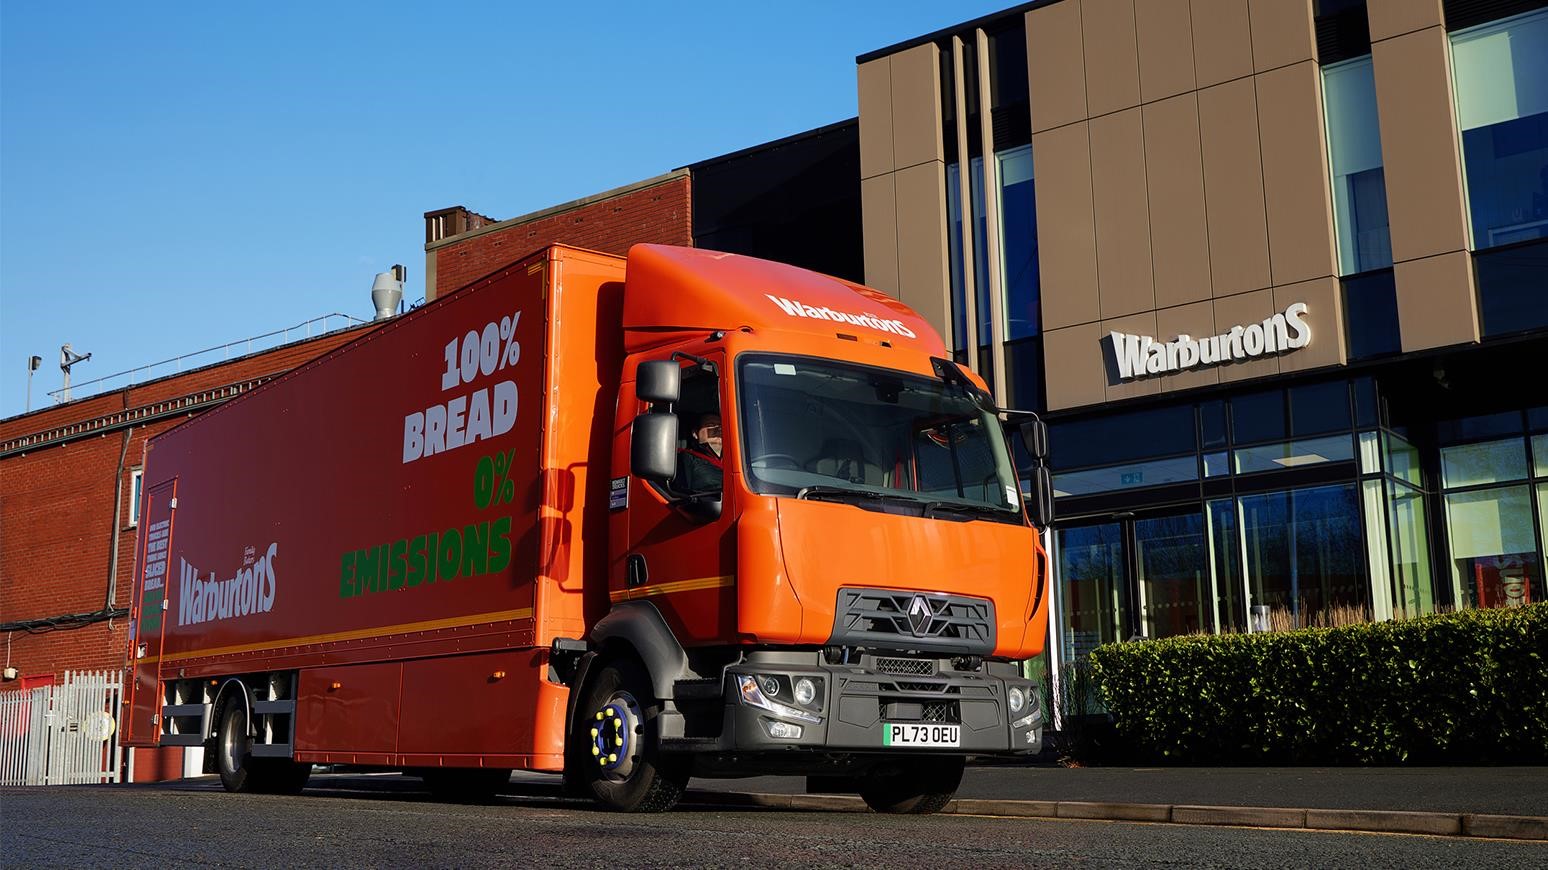 Warburtons Buys More Renault E-Tech Battery-Electric Trucks For Zero-Emission Bakery Deliveries